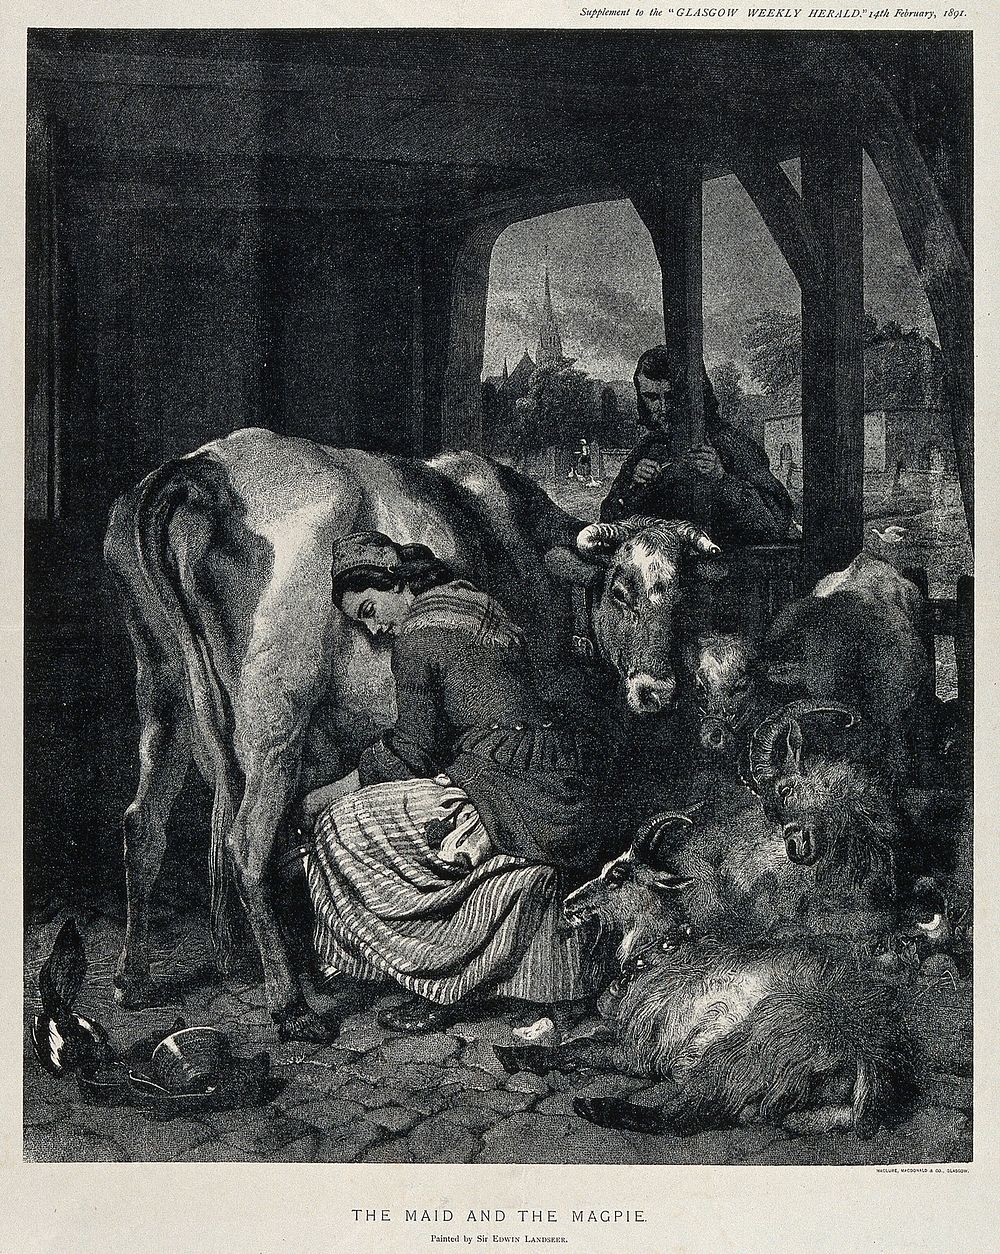 A maid is milking a cow surrounded by goats and a calf while a man watches the scene and a magpie is playing with the cow's…